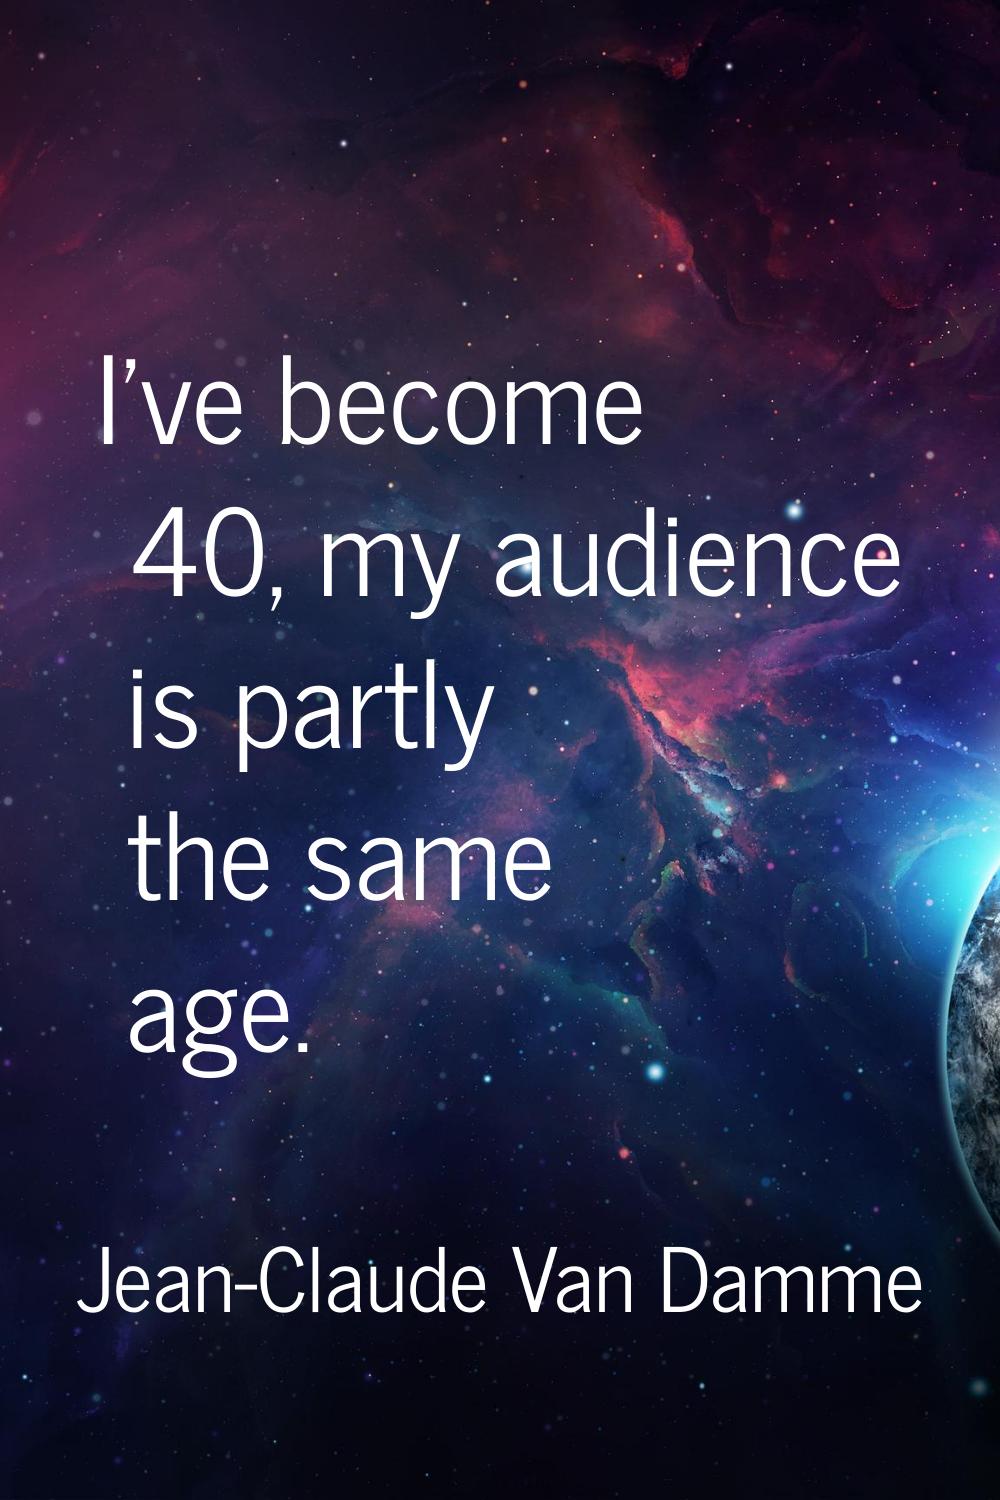 I've become 40, my audience is partly the same age.